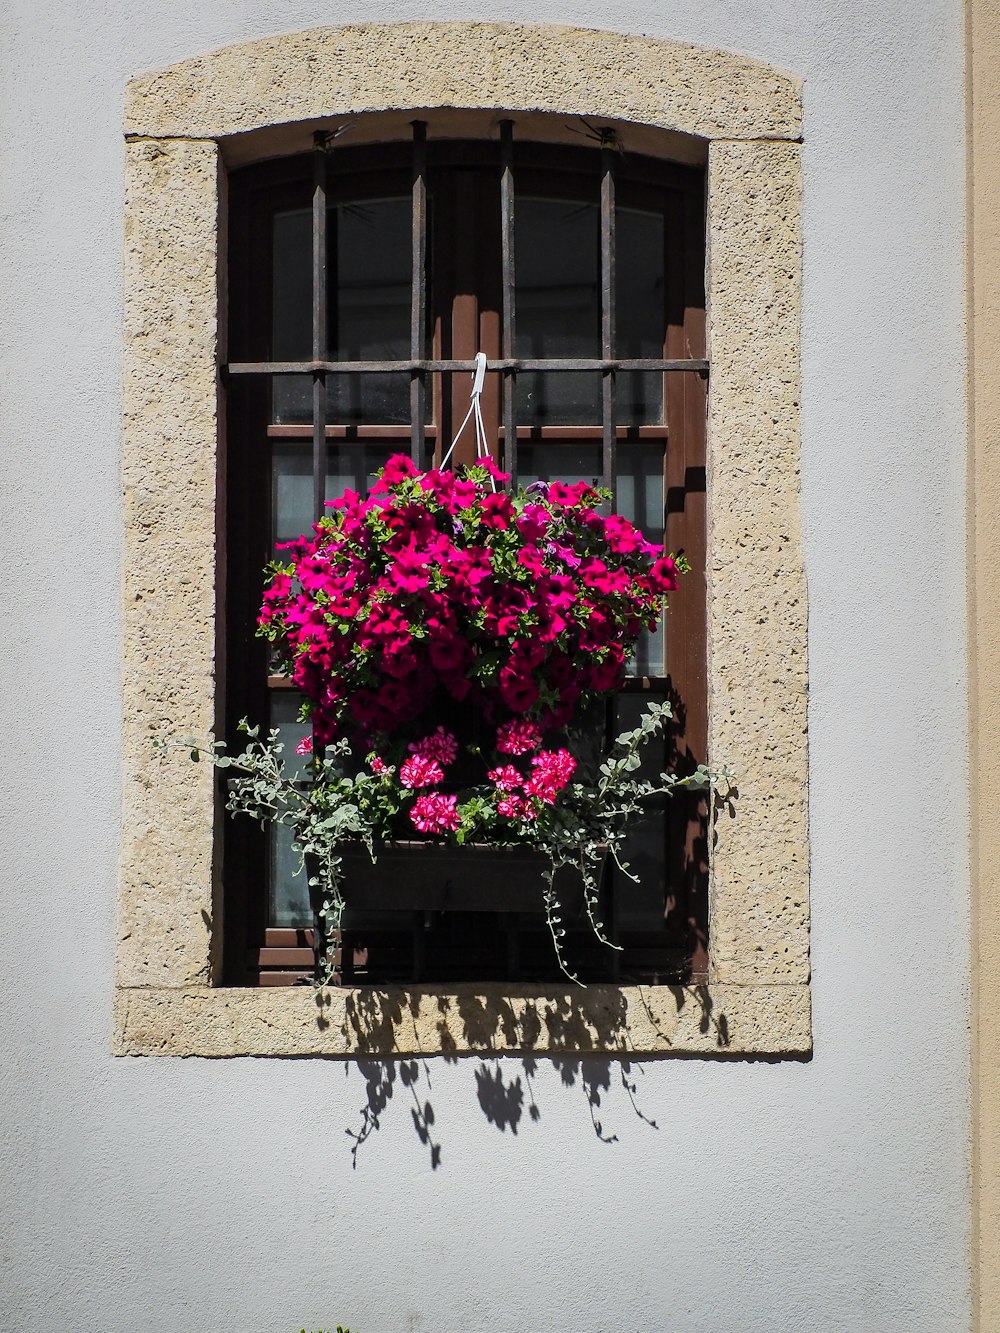 a window with a planter filled with pink flowers